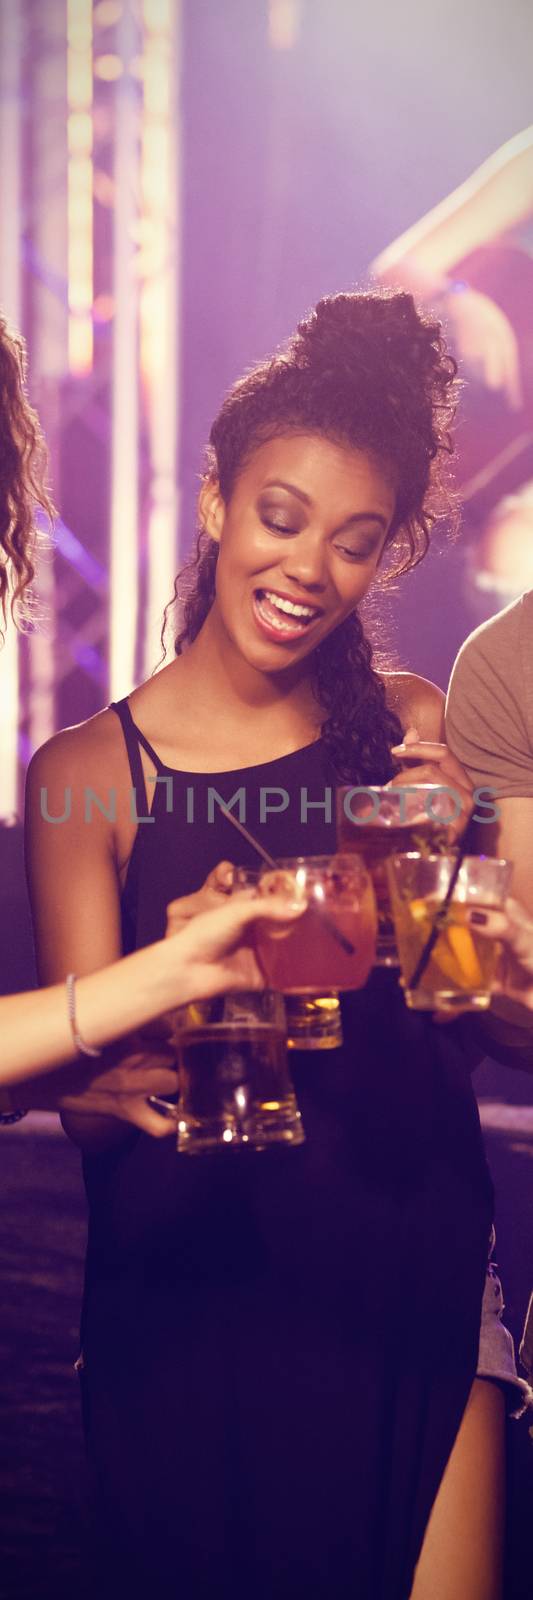 Friends toasting drinks with performer in background by Wavebreakmedia